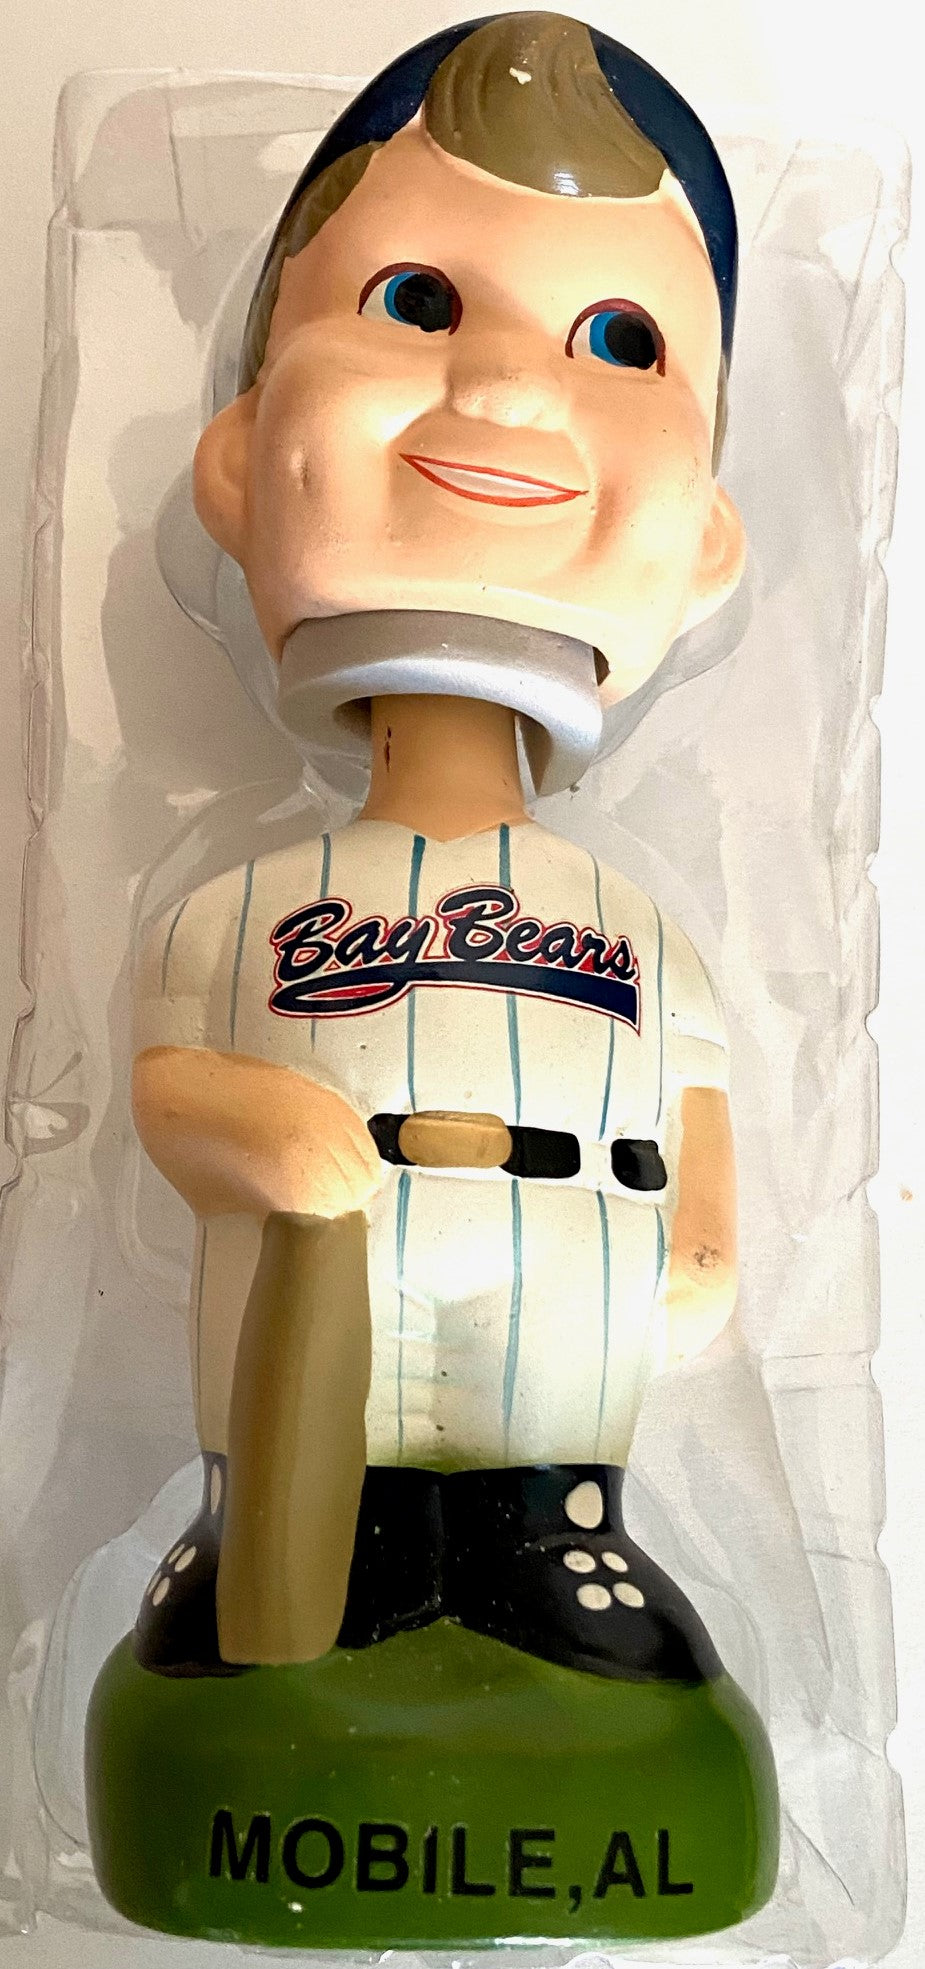 Mobile BayBears 1999 Minor League Bobblehead (Used/Very Nice) by Twins Enterprise